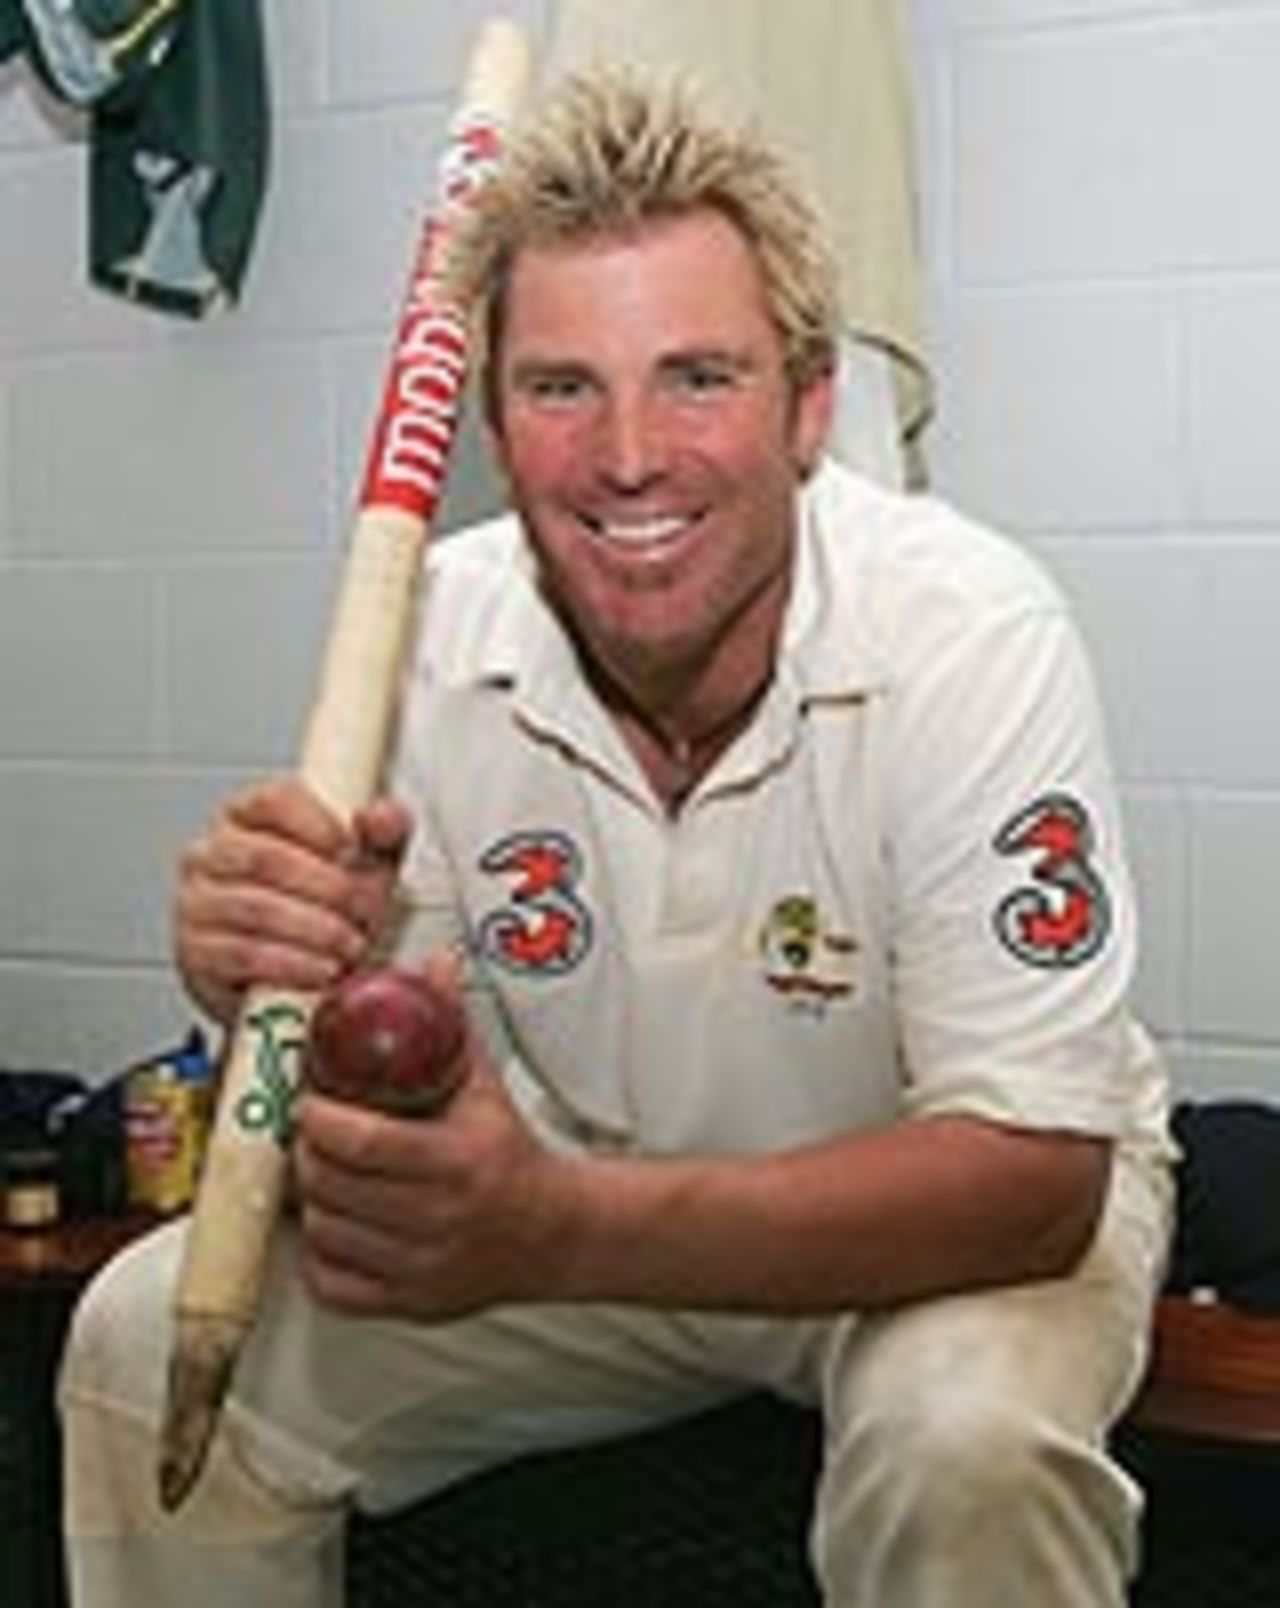 Shane Warne - now level with Muttiah Muralitharan's world record of 527 Test wickets, Australia v Sri Lanka, 2nd Test, Cairns, 5th day, July 13, 2004